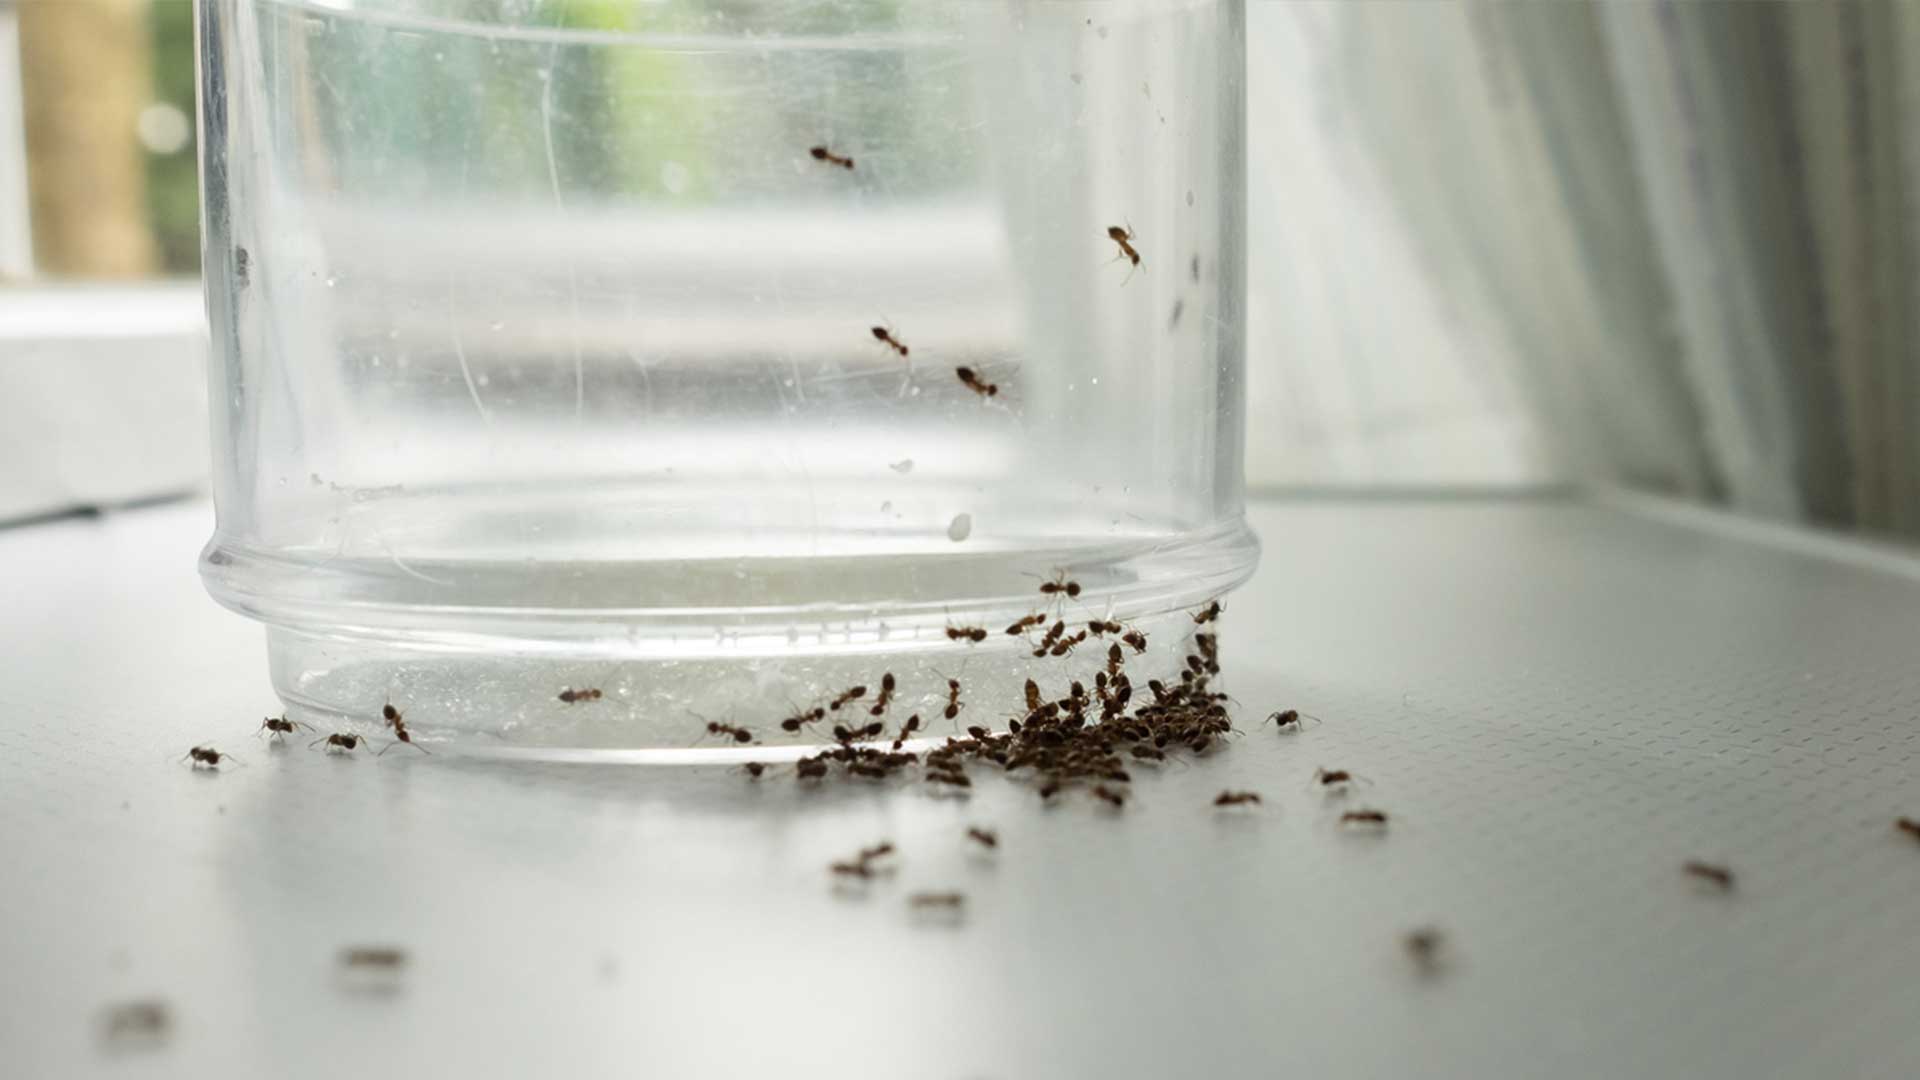 Ants crawling up side of glass in kitchen